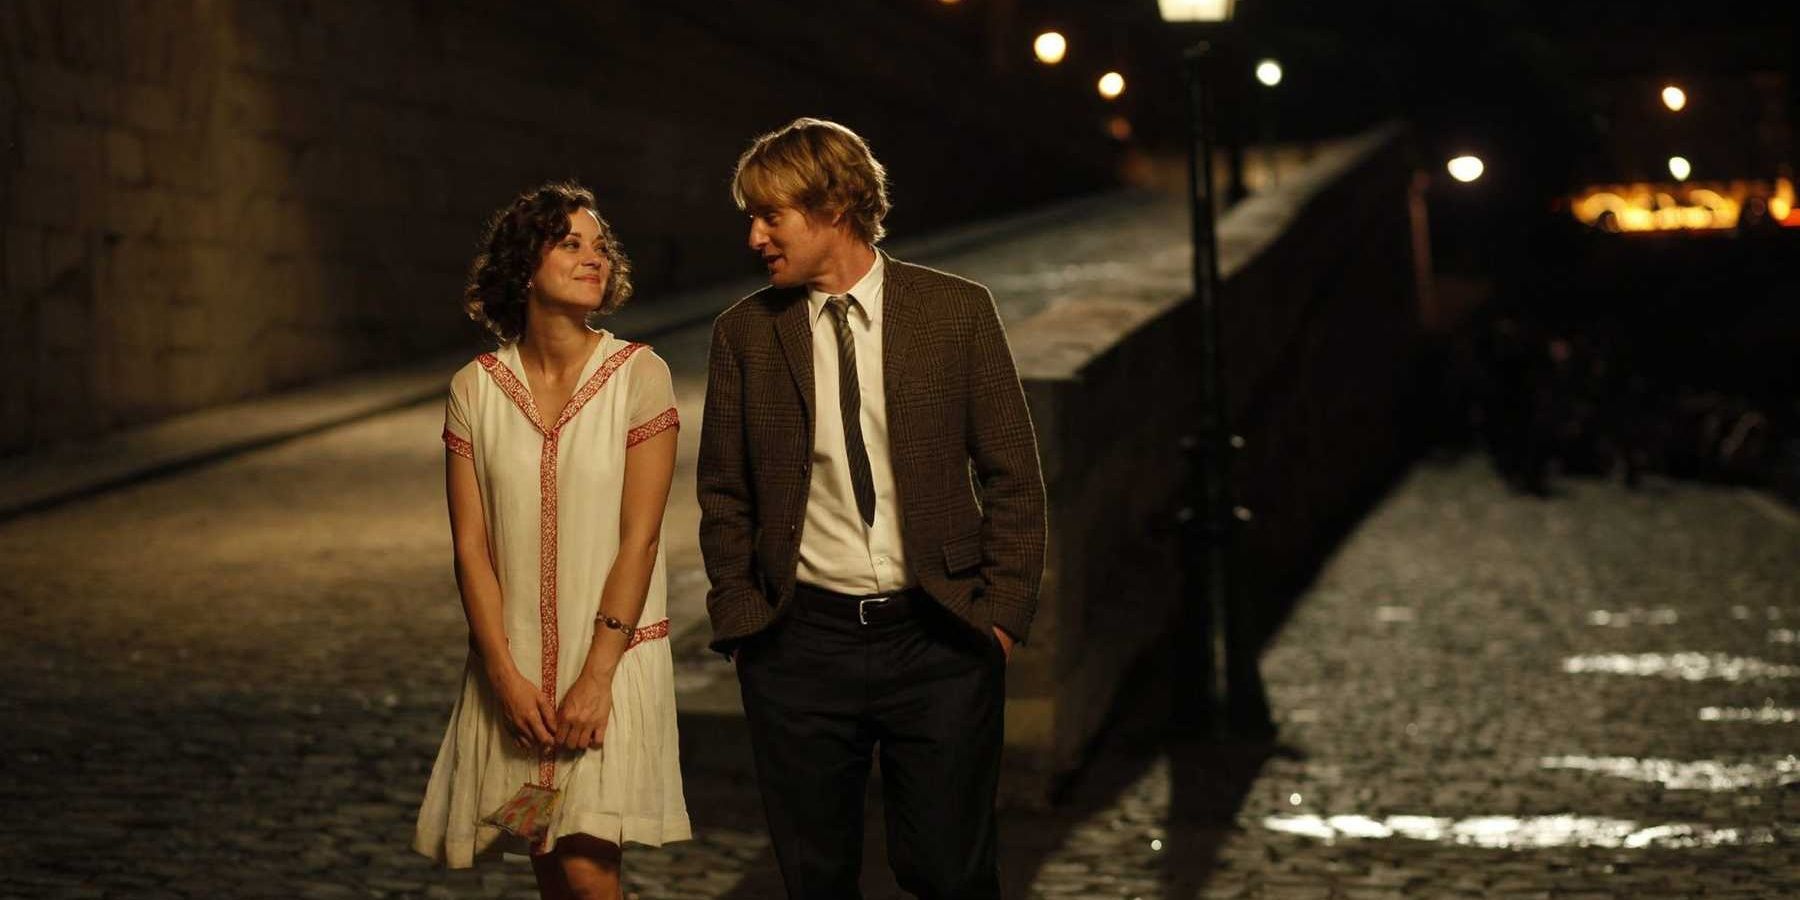 Adriana and Gil walking at night in Midnight in Paris